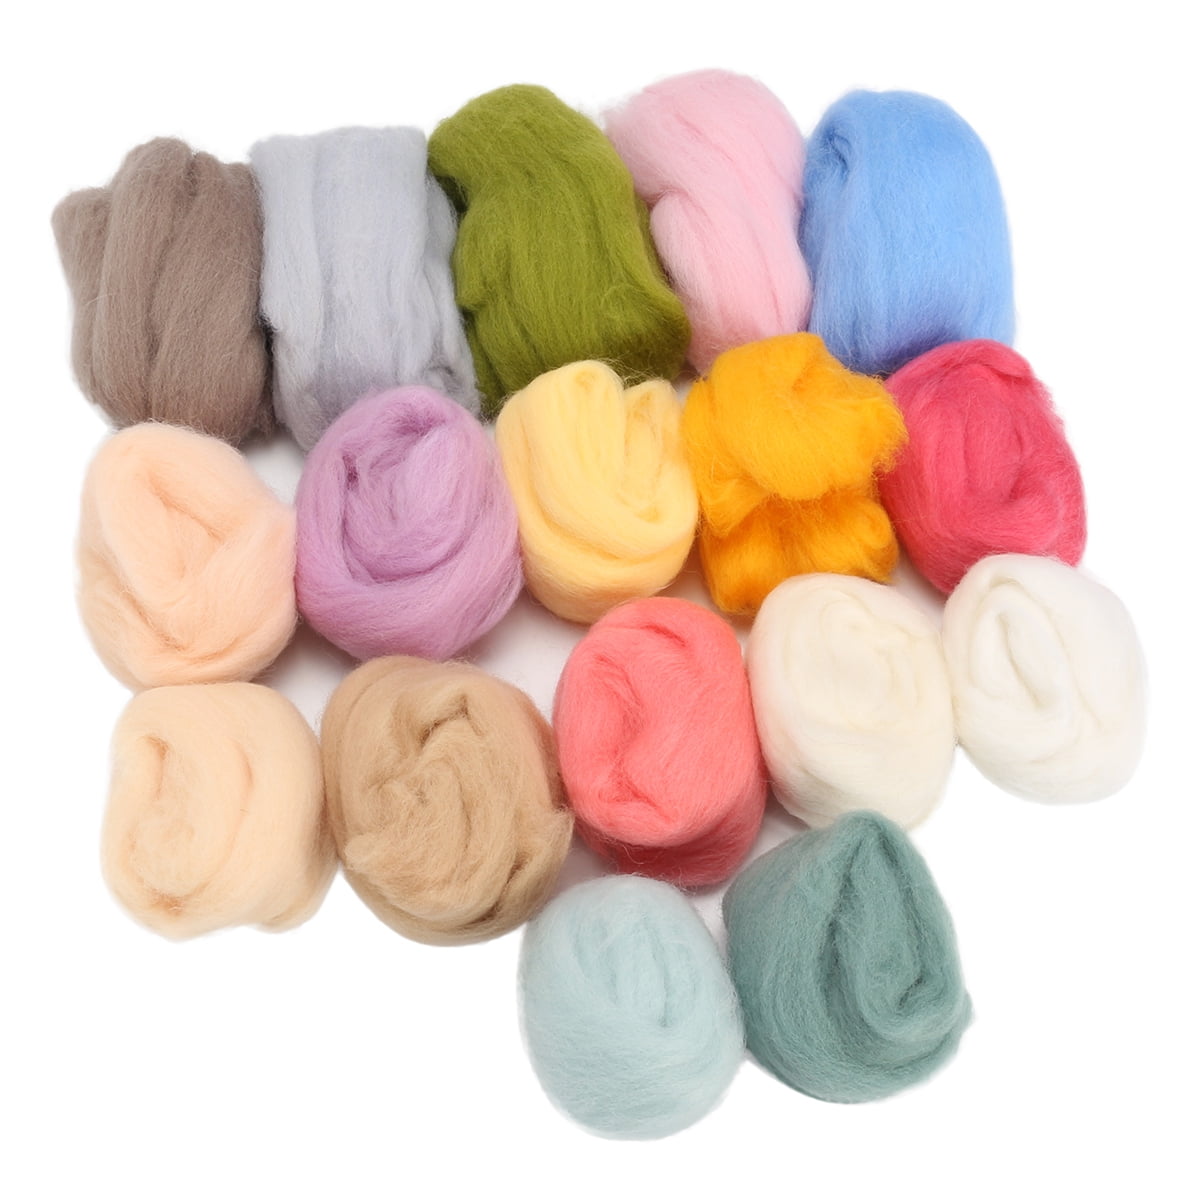 17Colors Wool Yarn Roving Fibre Hand Spinning DIY Craft for Needle Felting